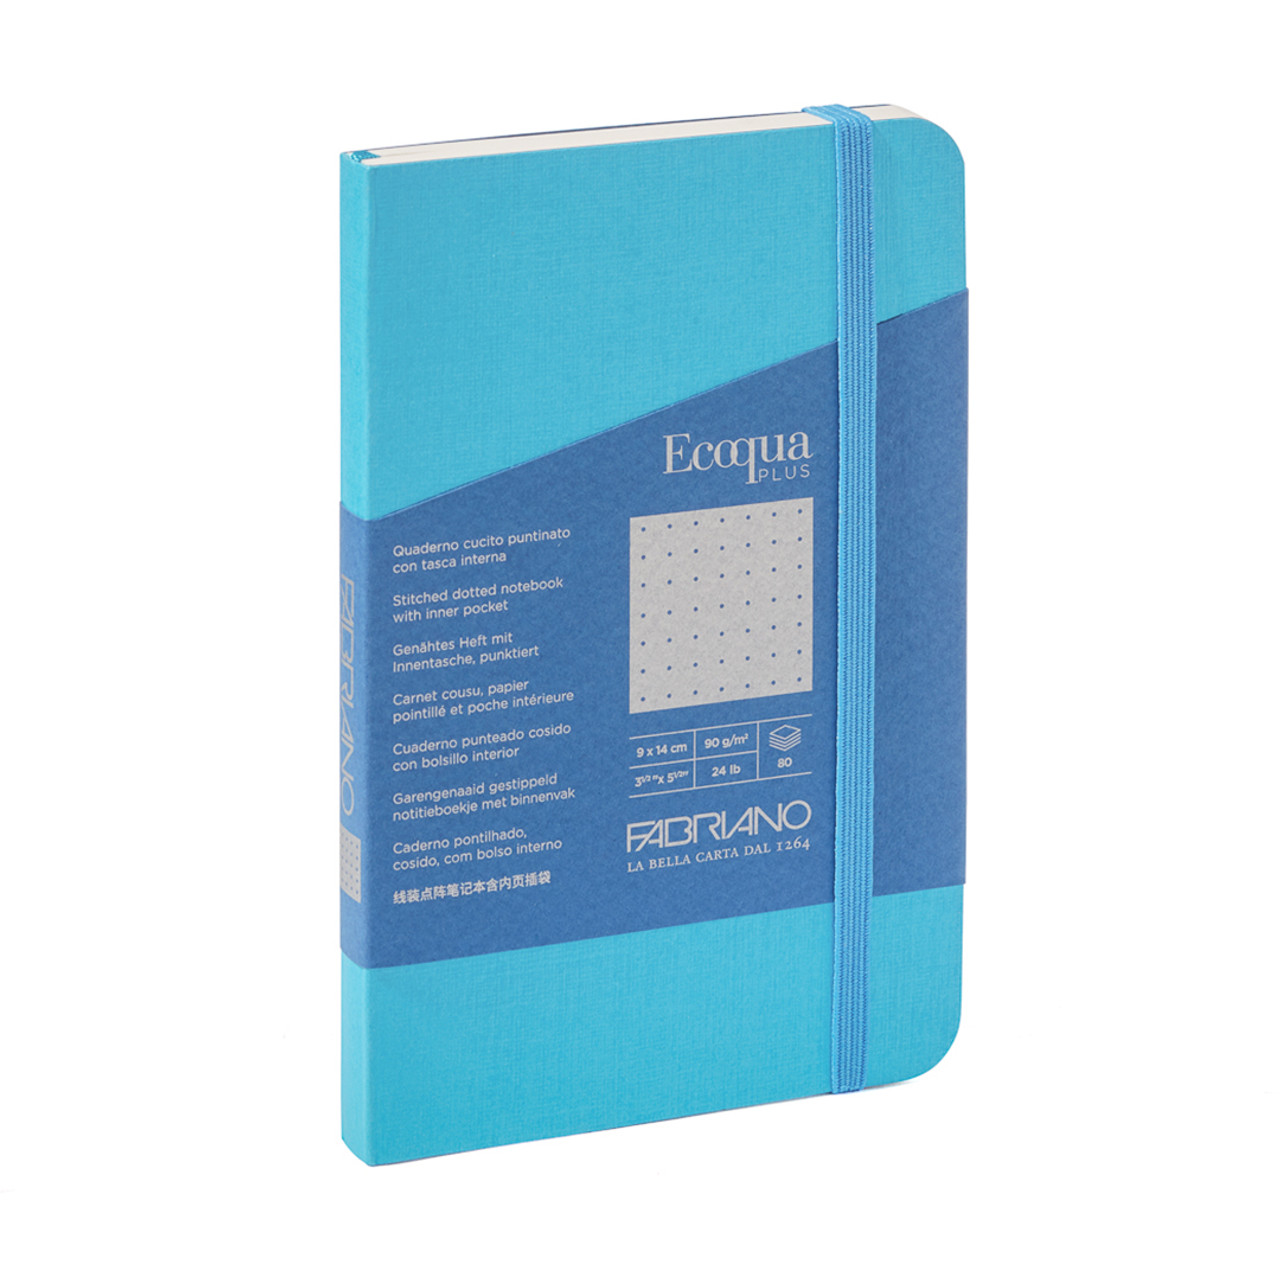 Fabriano Ecoqua Plus Stitch-Bound Notebook 3.5x5.5 Dot Turquoise - Wet  Paint Artists' Materials and Framing